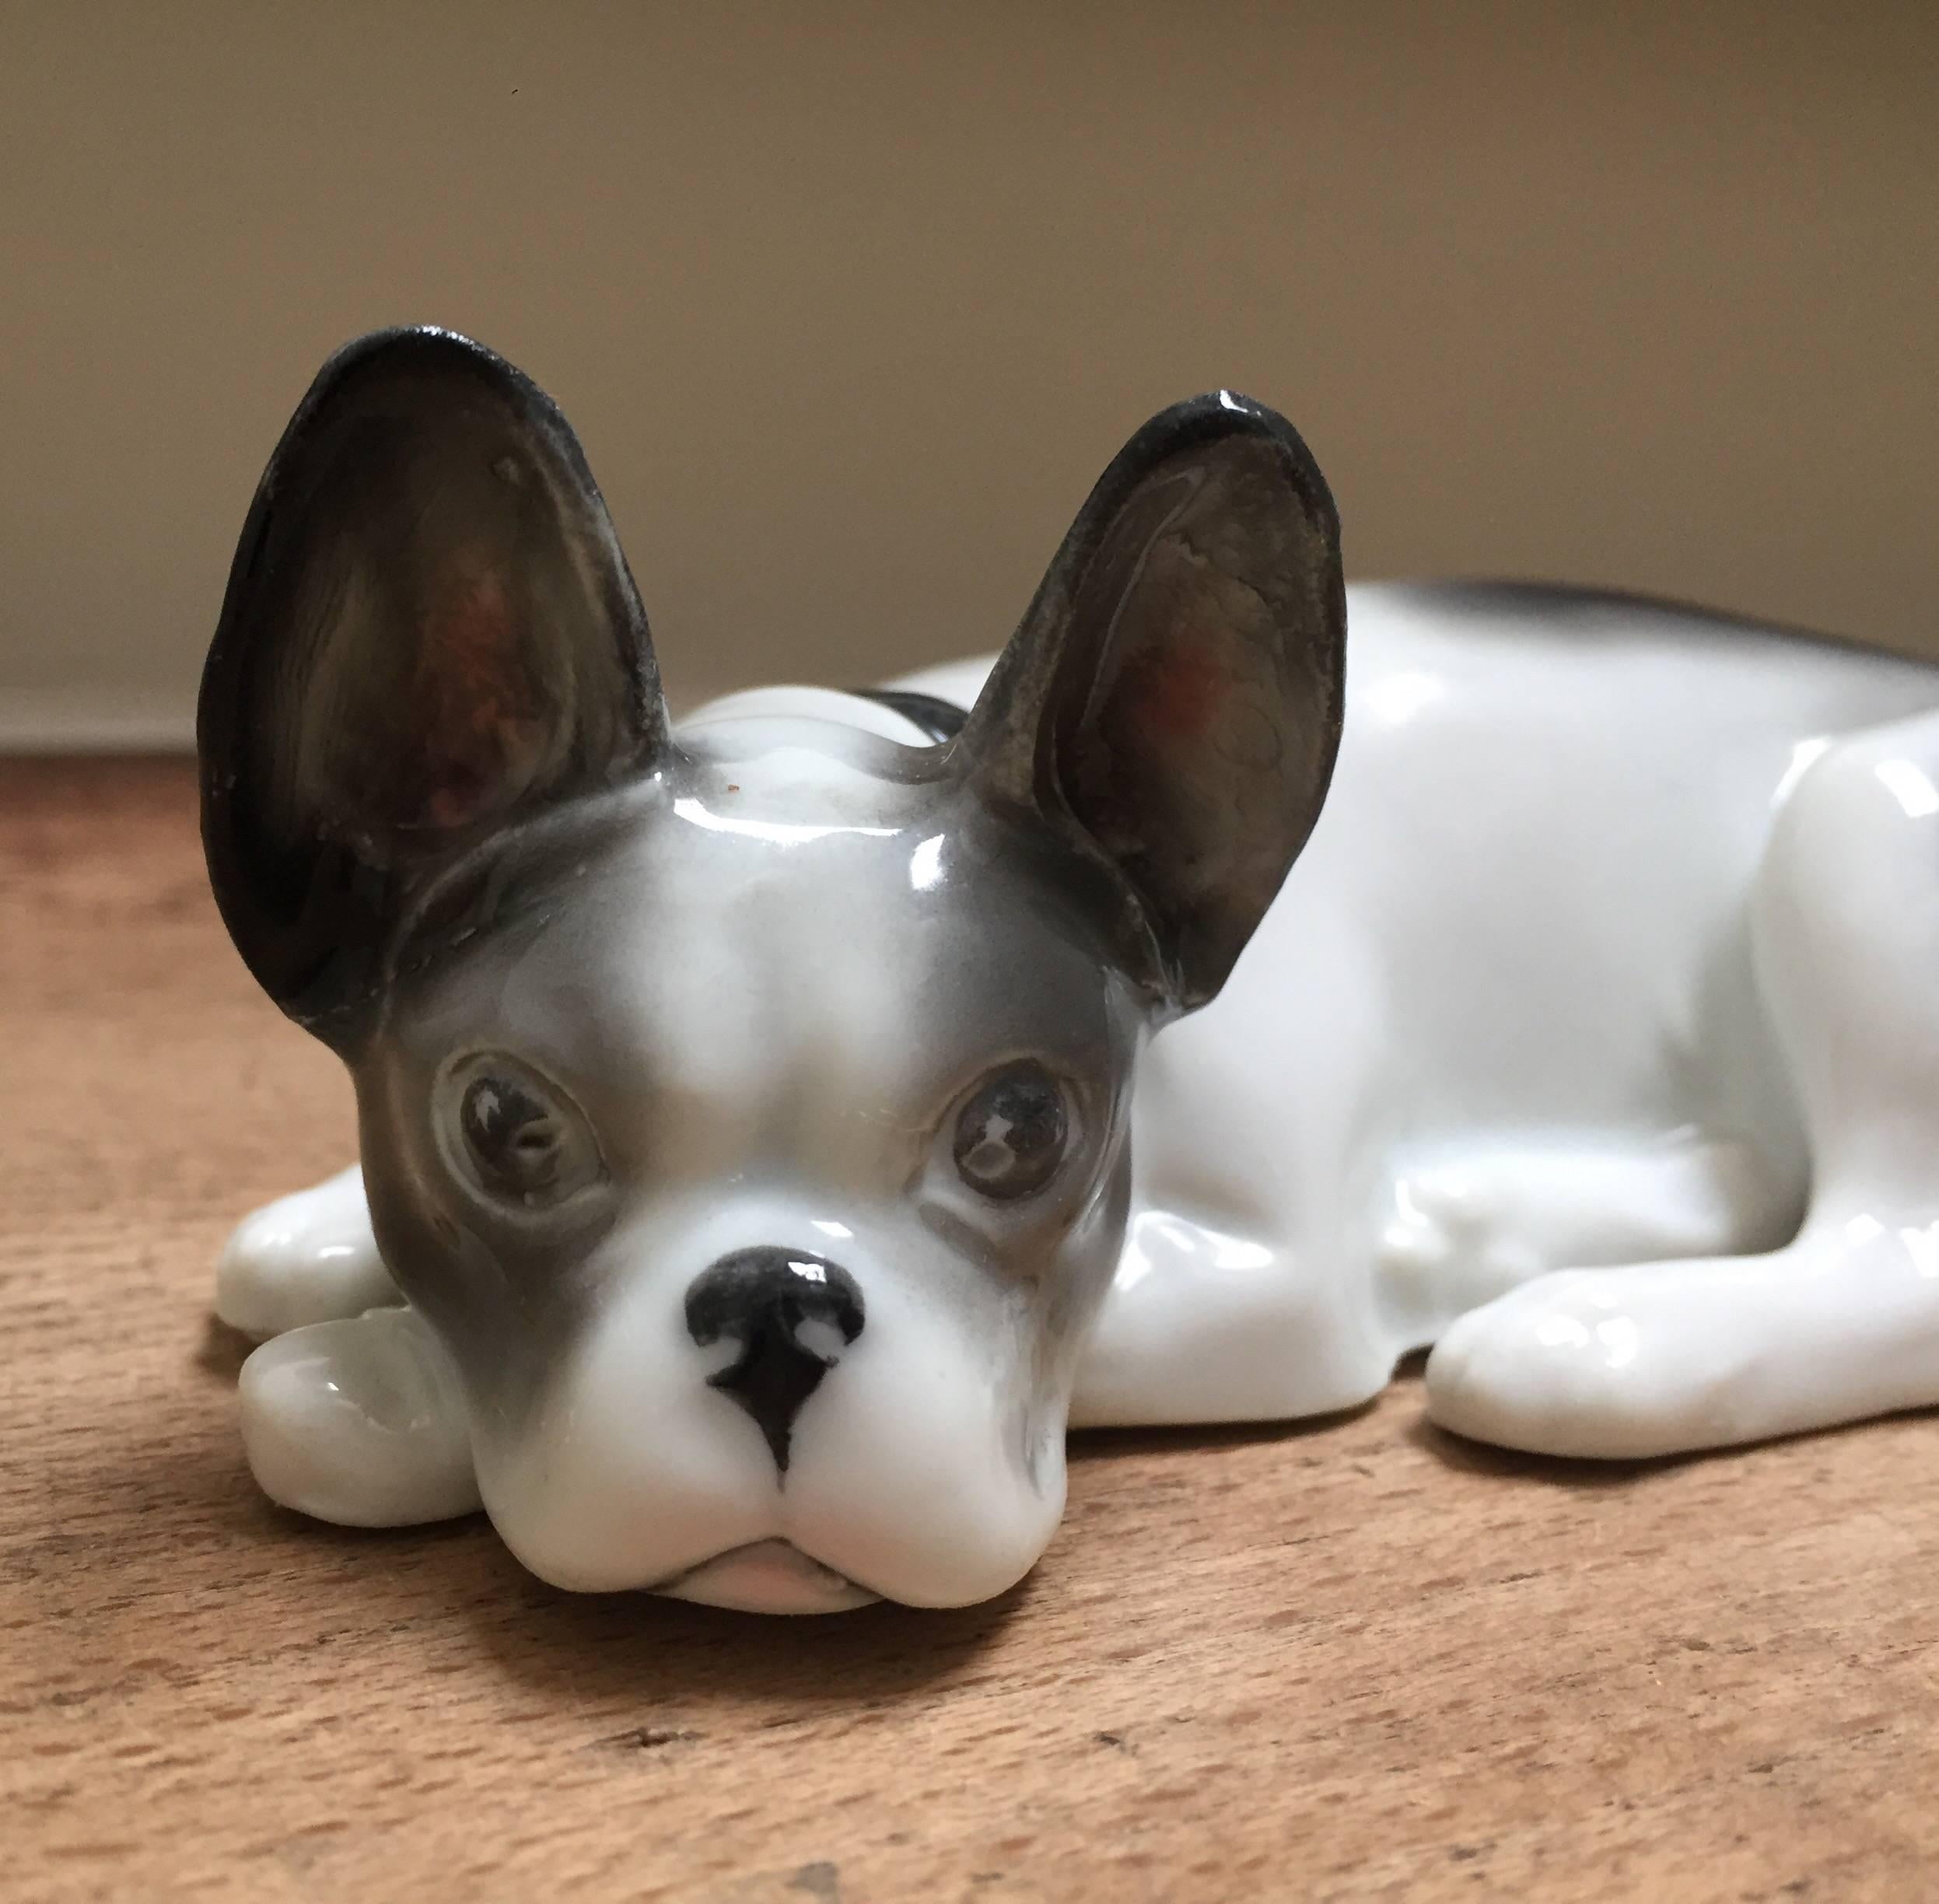 Charming lying porcelain dog figurine, French Bulldog puppy, Bully, Art Deco period.
Made by the porcelain and faience factory Pfeffer Gotha Germany.
According to the stamp produced between 1934 and 1942. The factory has been closed in 1942.